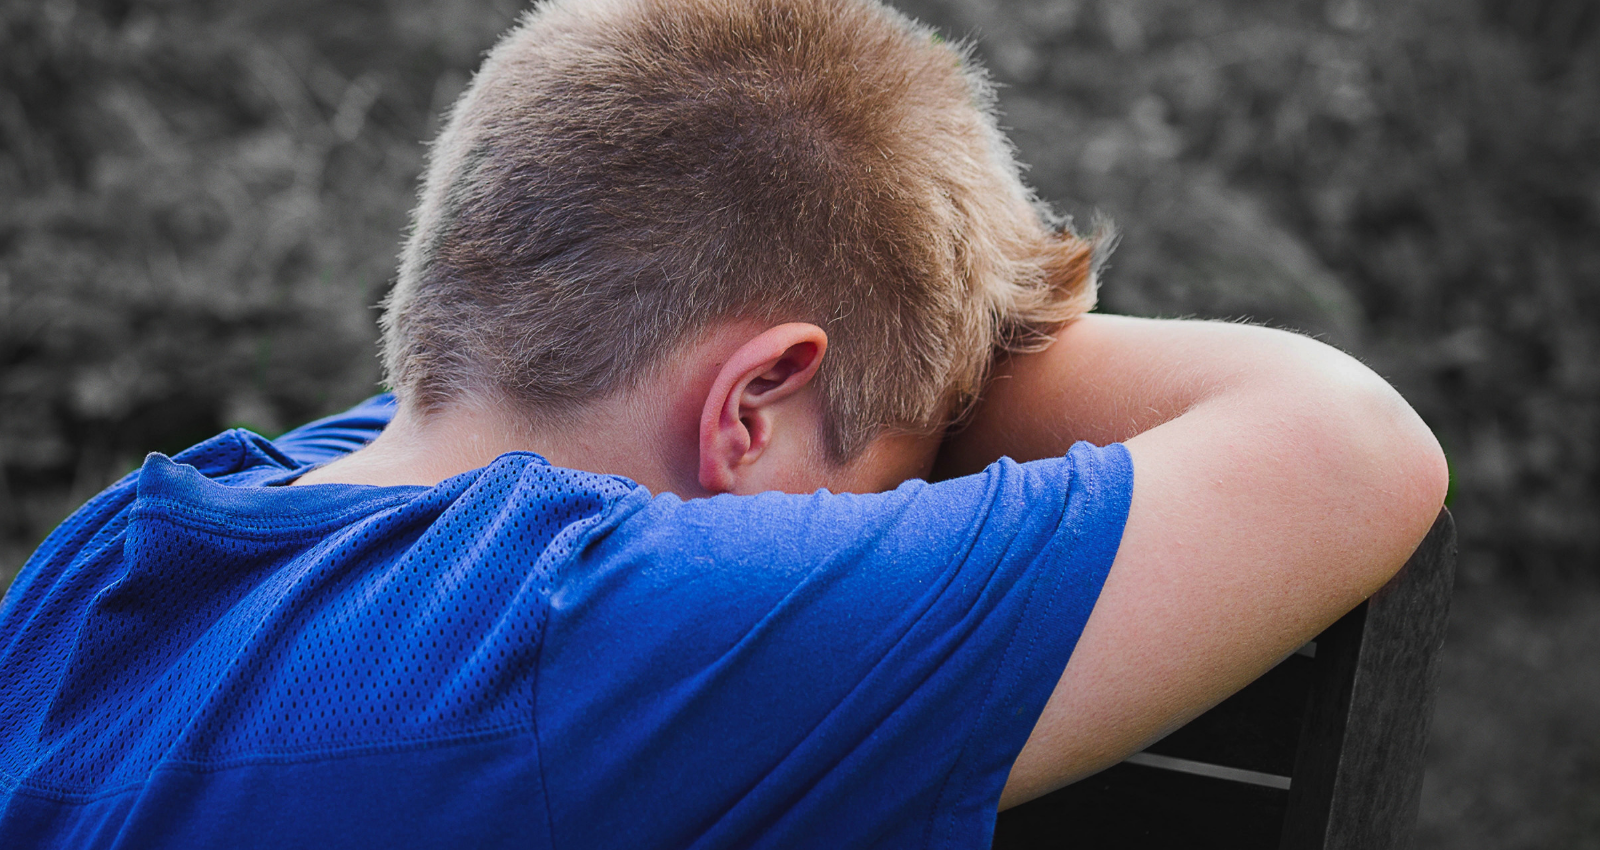 Dealing with bullying for parents of children with special needs